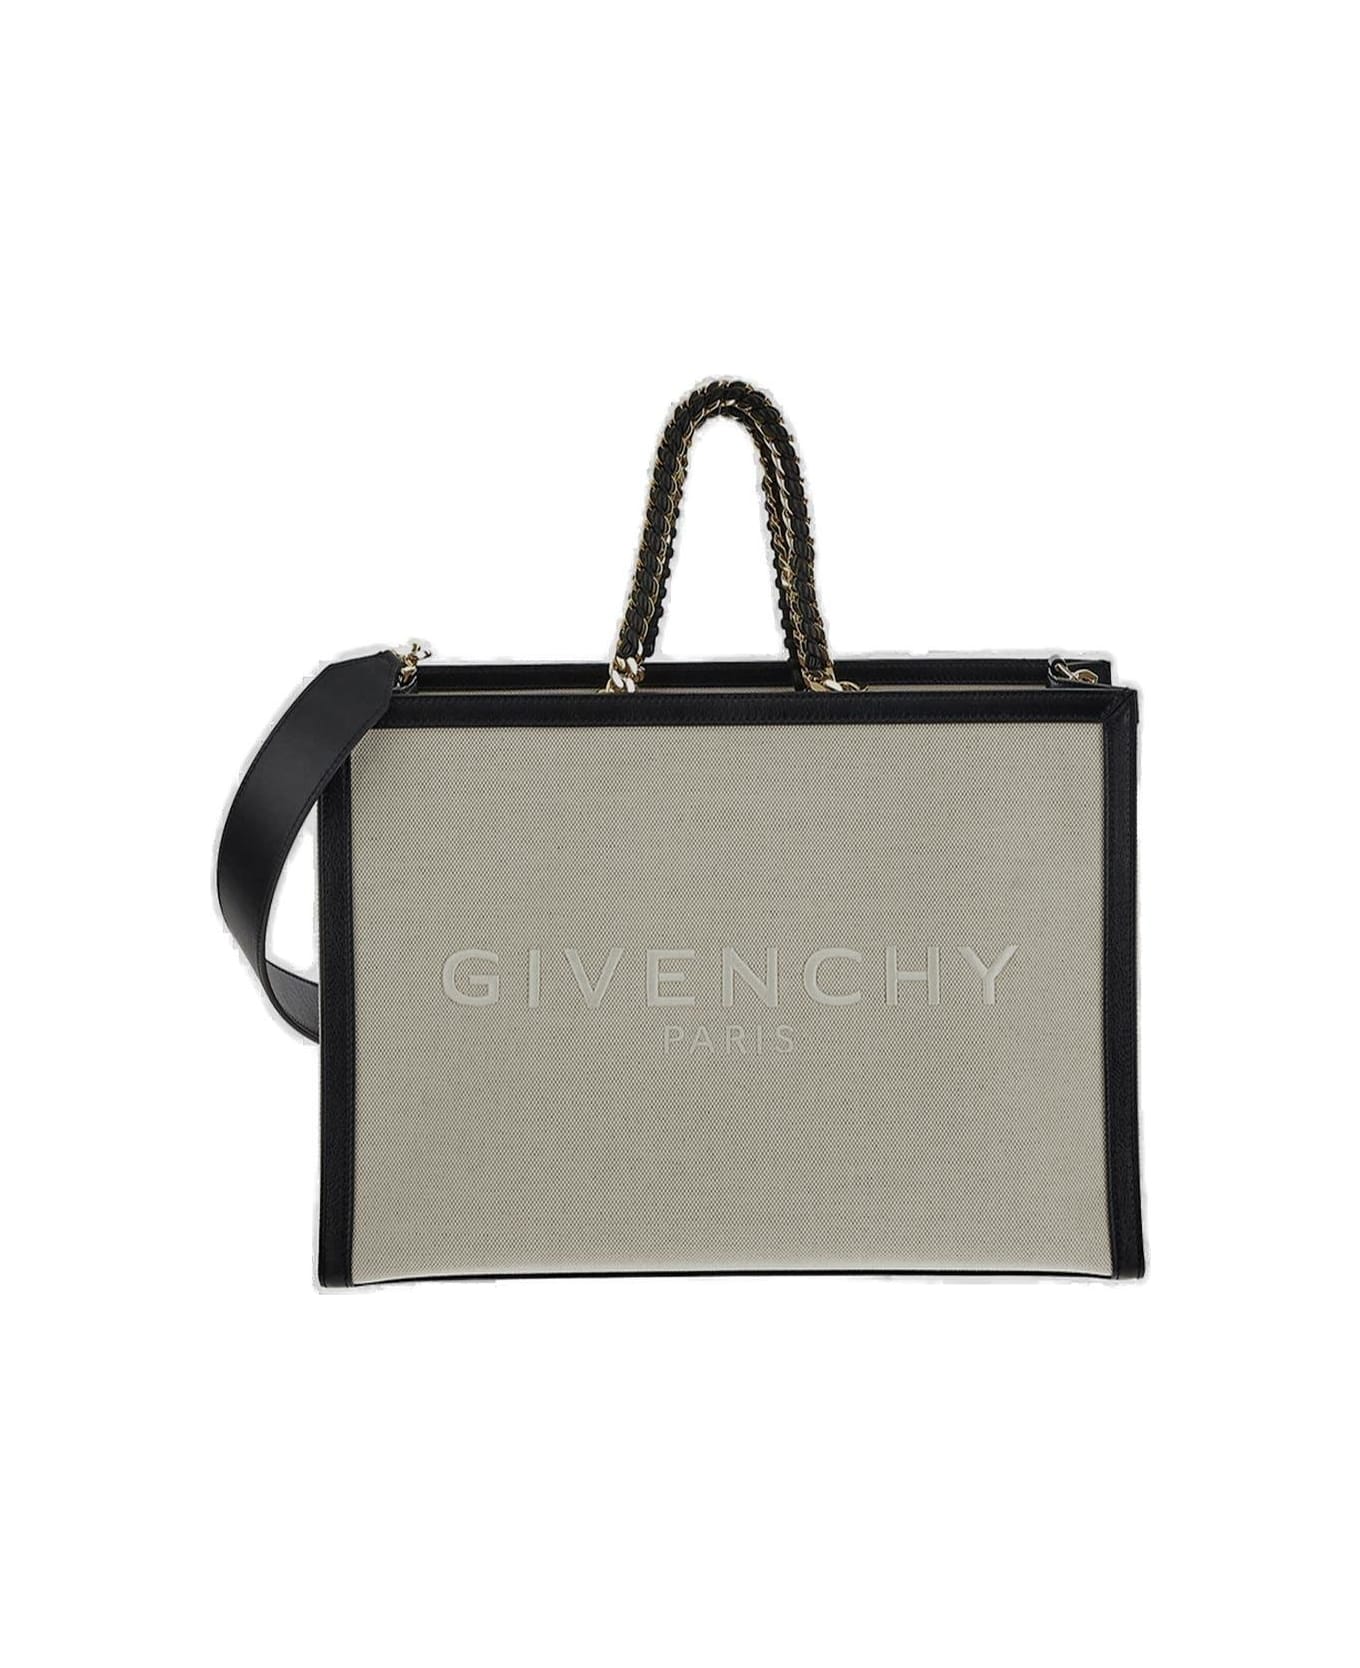 Givenchy Logo Embroidered Tote Bag - NATURAL BEIGE トートバッグ